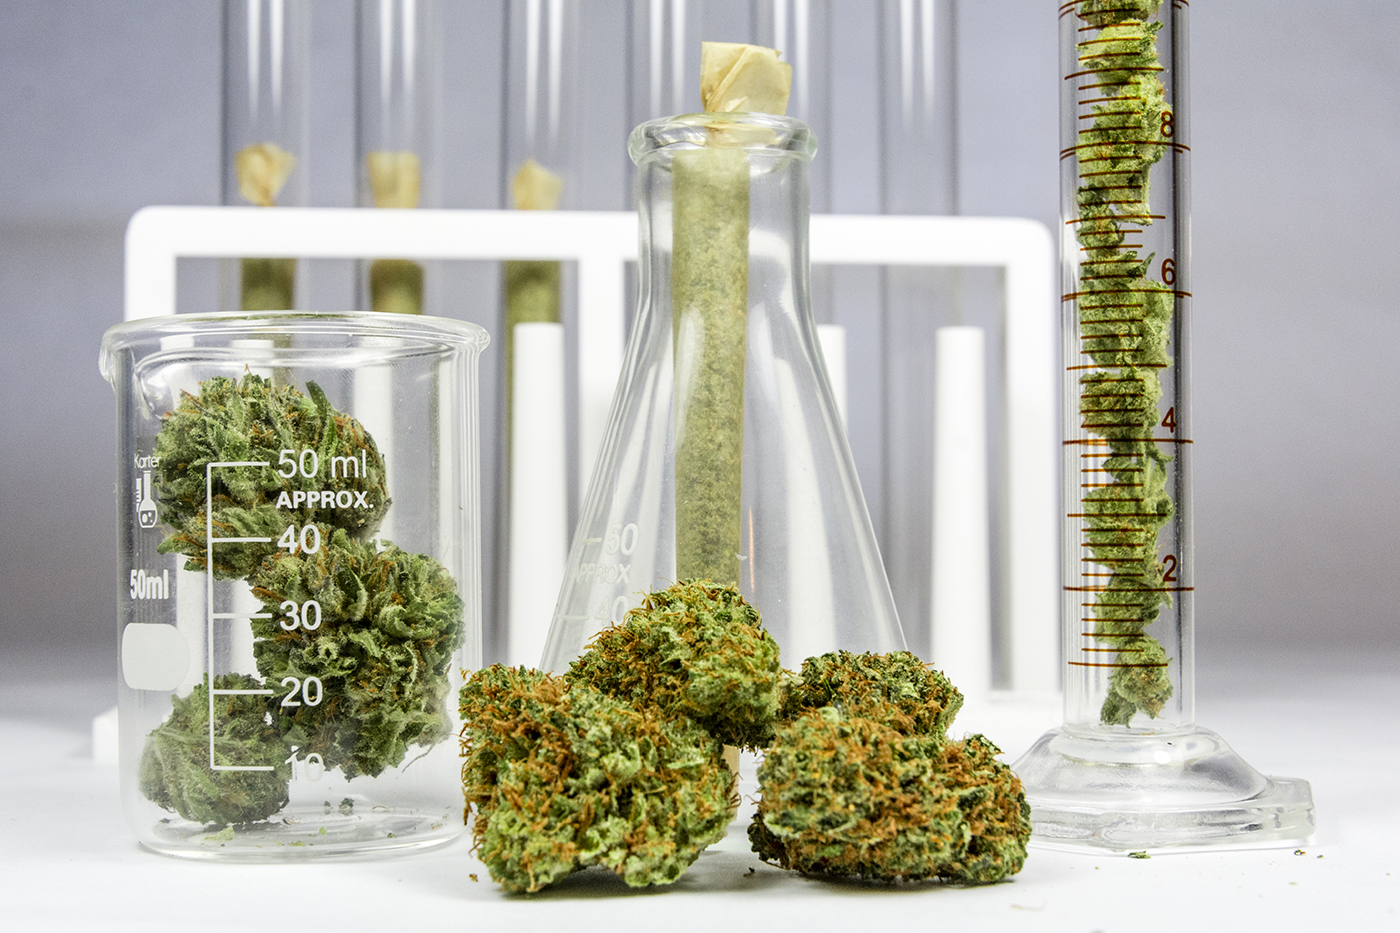 cannabis buds and glass lab testing equipment